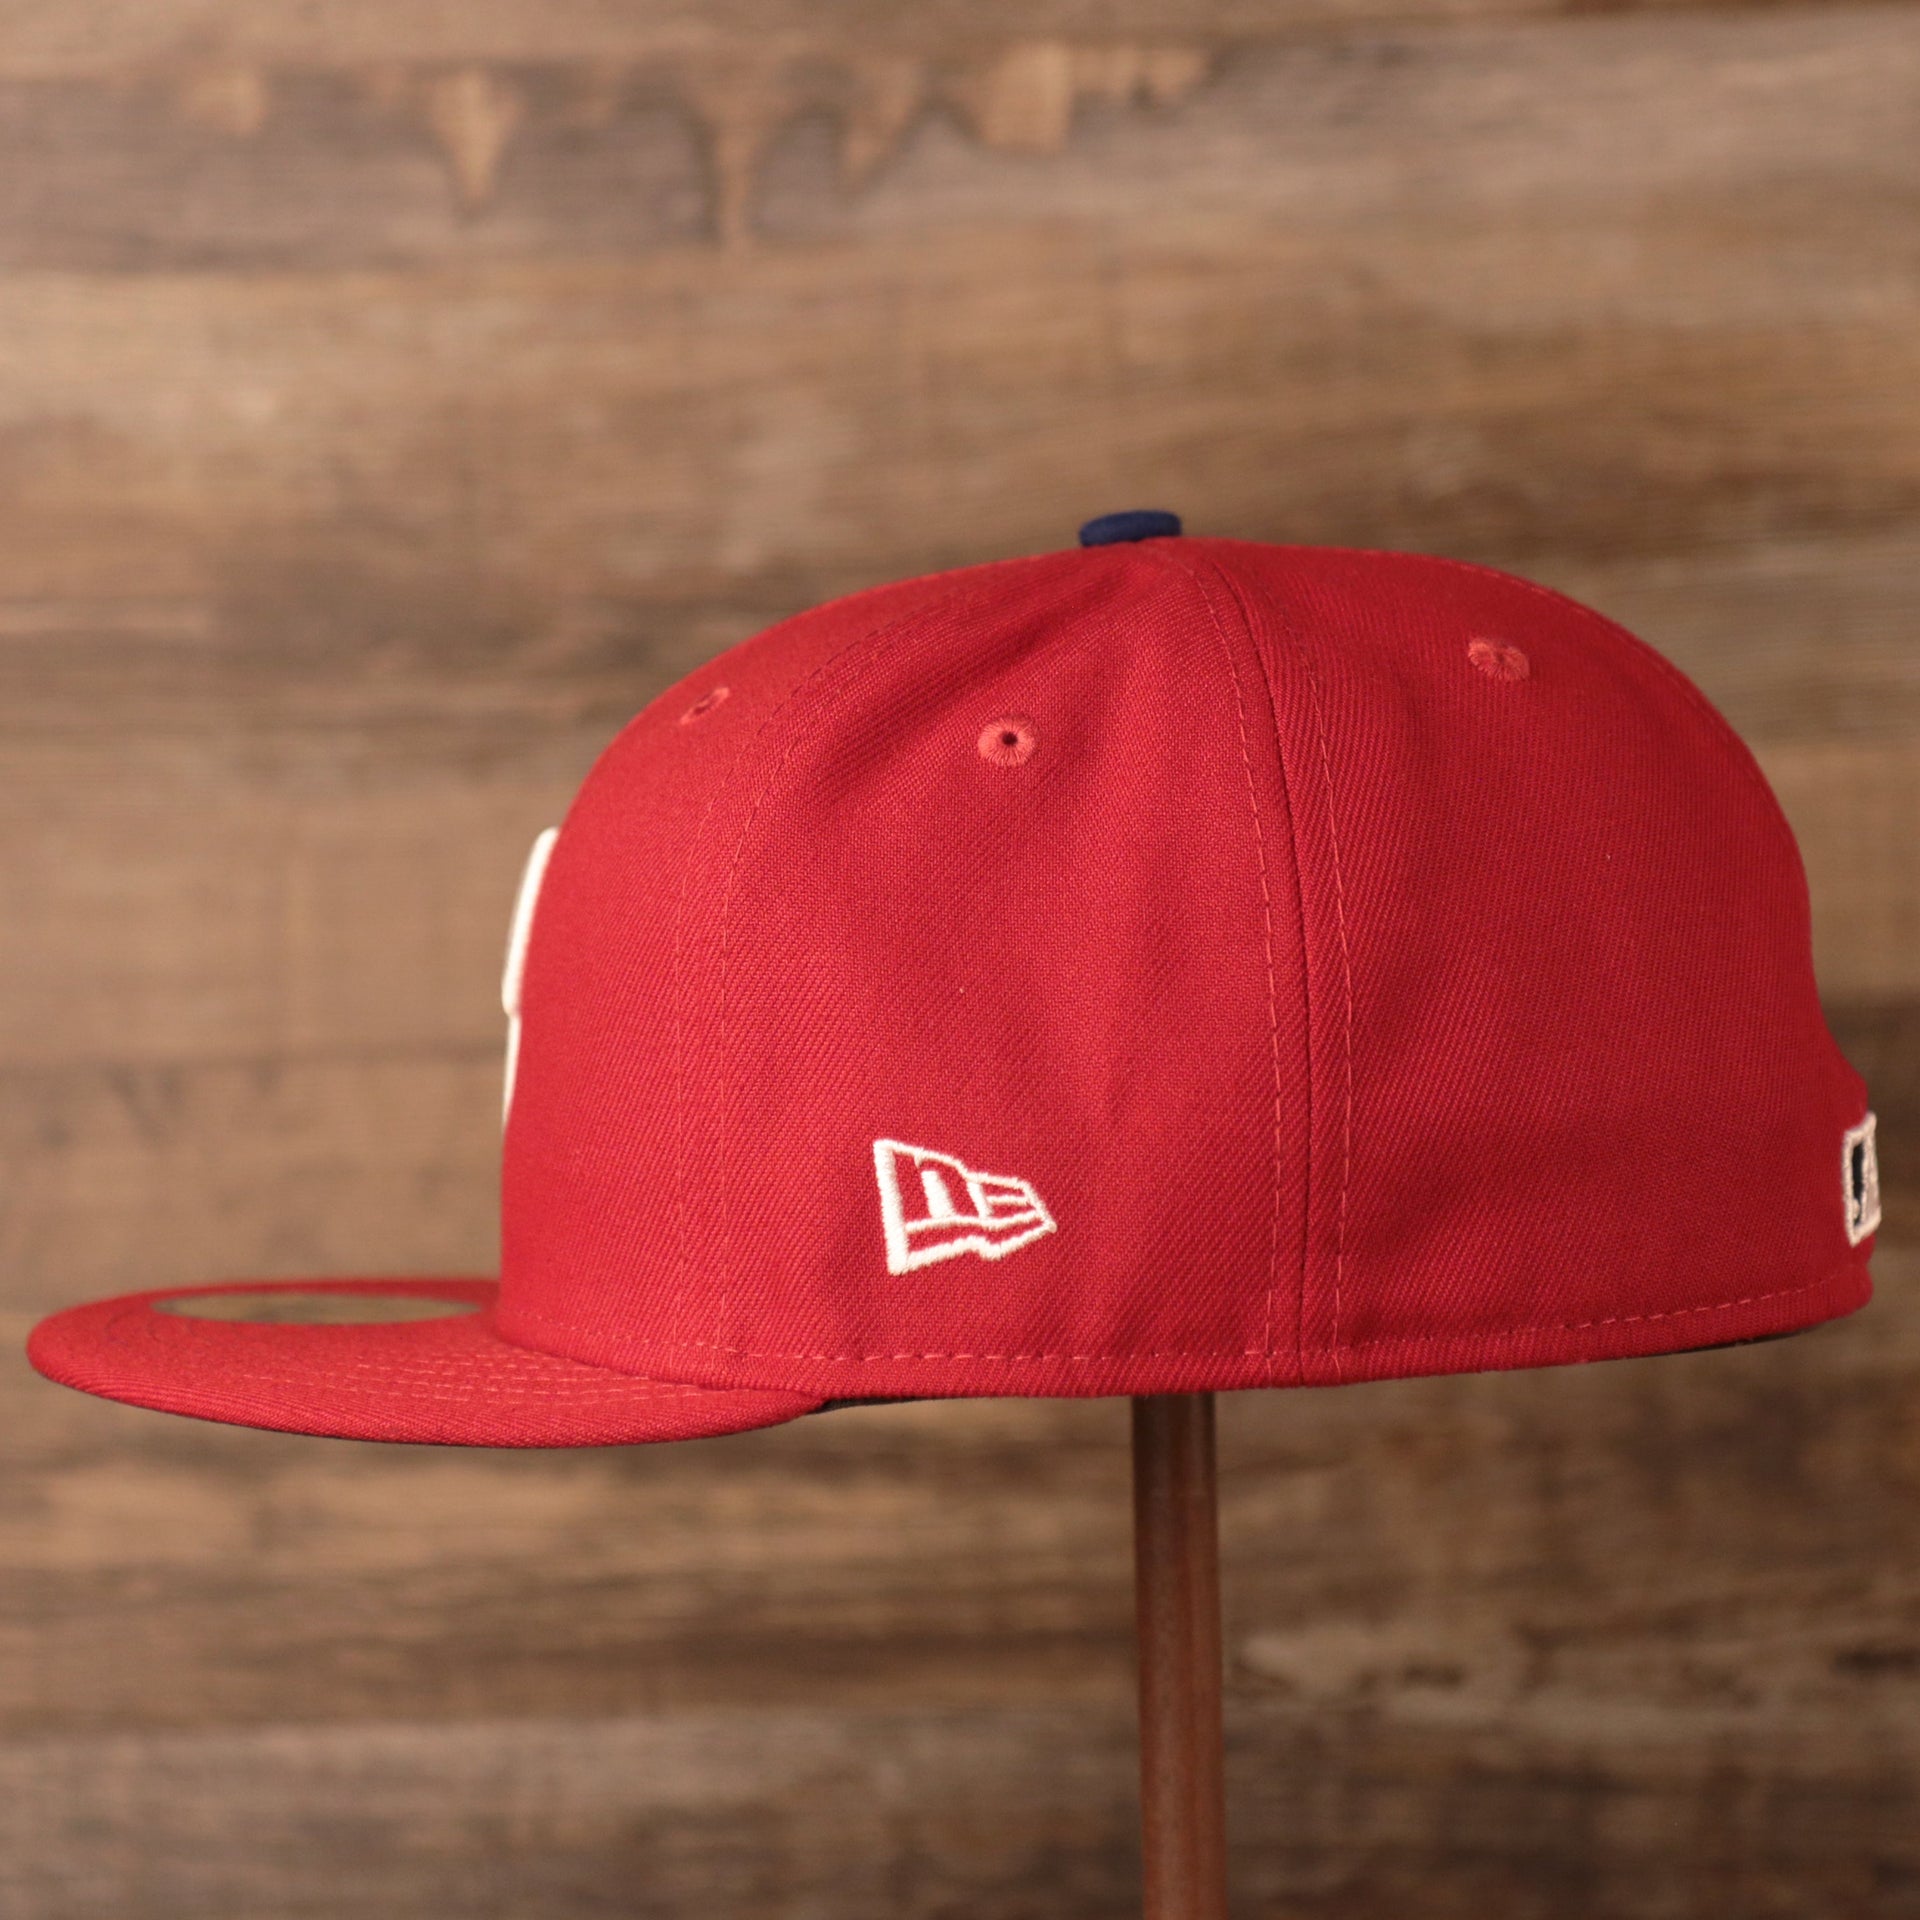 The wearers left side has the new era logo Phillies Jackie Robinson Fitted Cap | Philadelphia Phillies On-Field Jackie Robinson Side PatchRed Fitted Hat